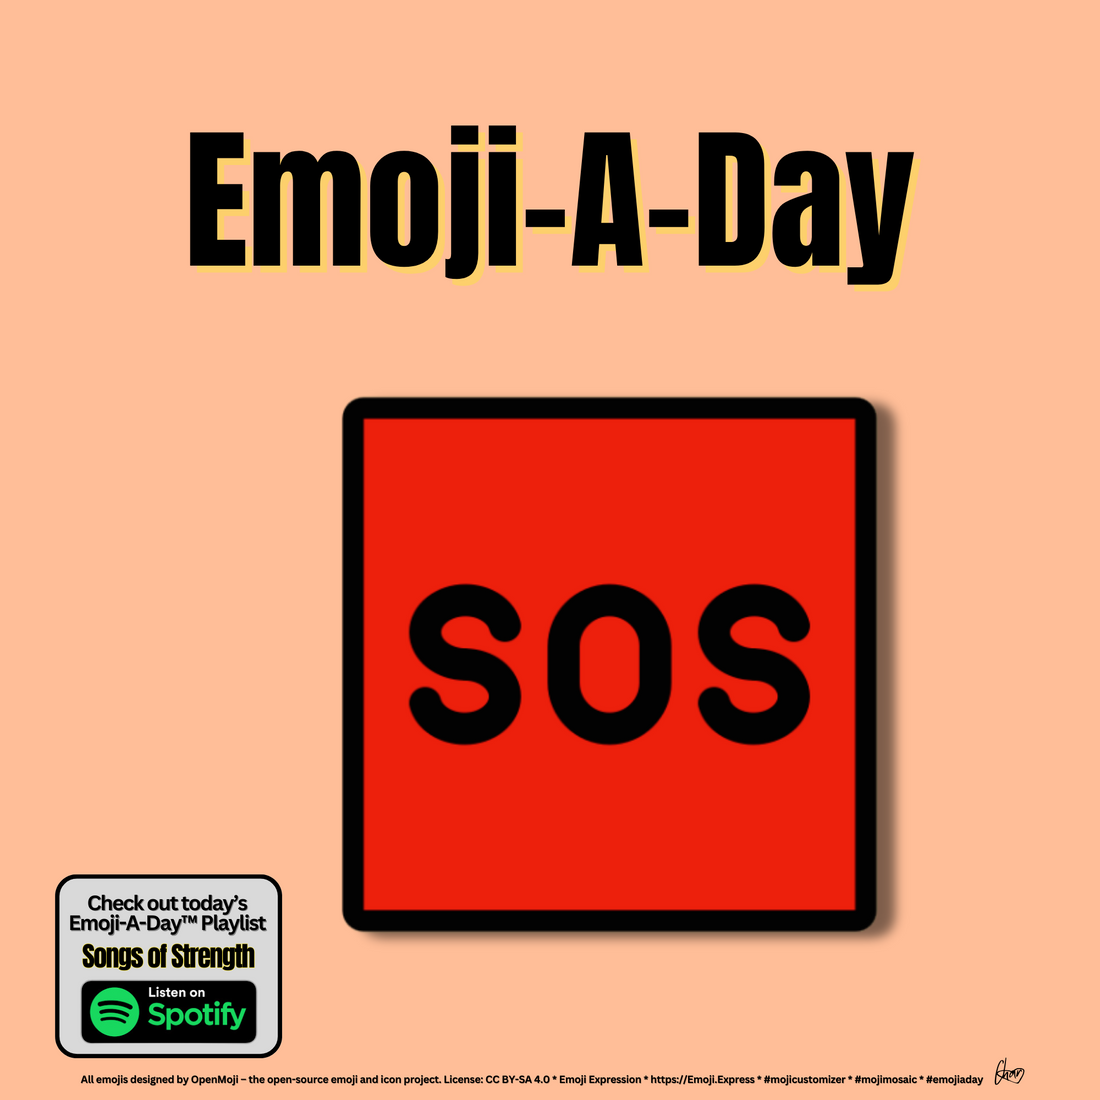 Emoij-A-Day theme with SOS Button emoji and Songs of Strength Spotify Playlist